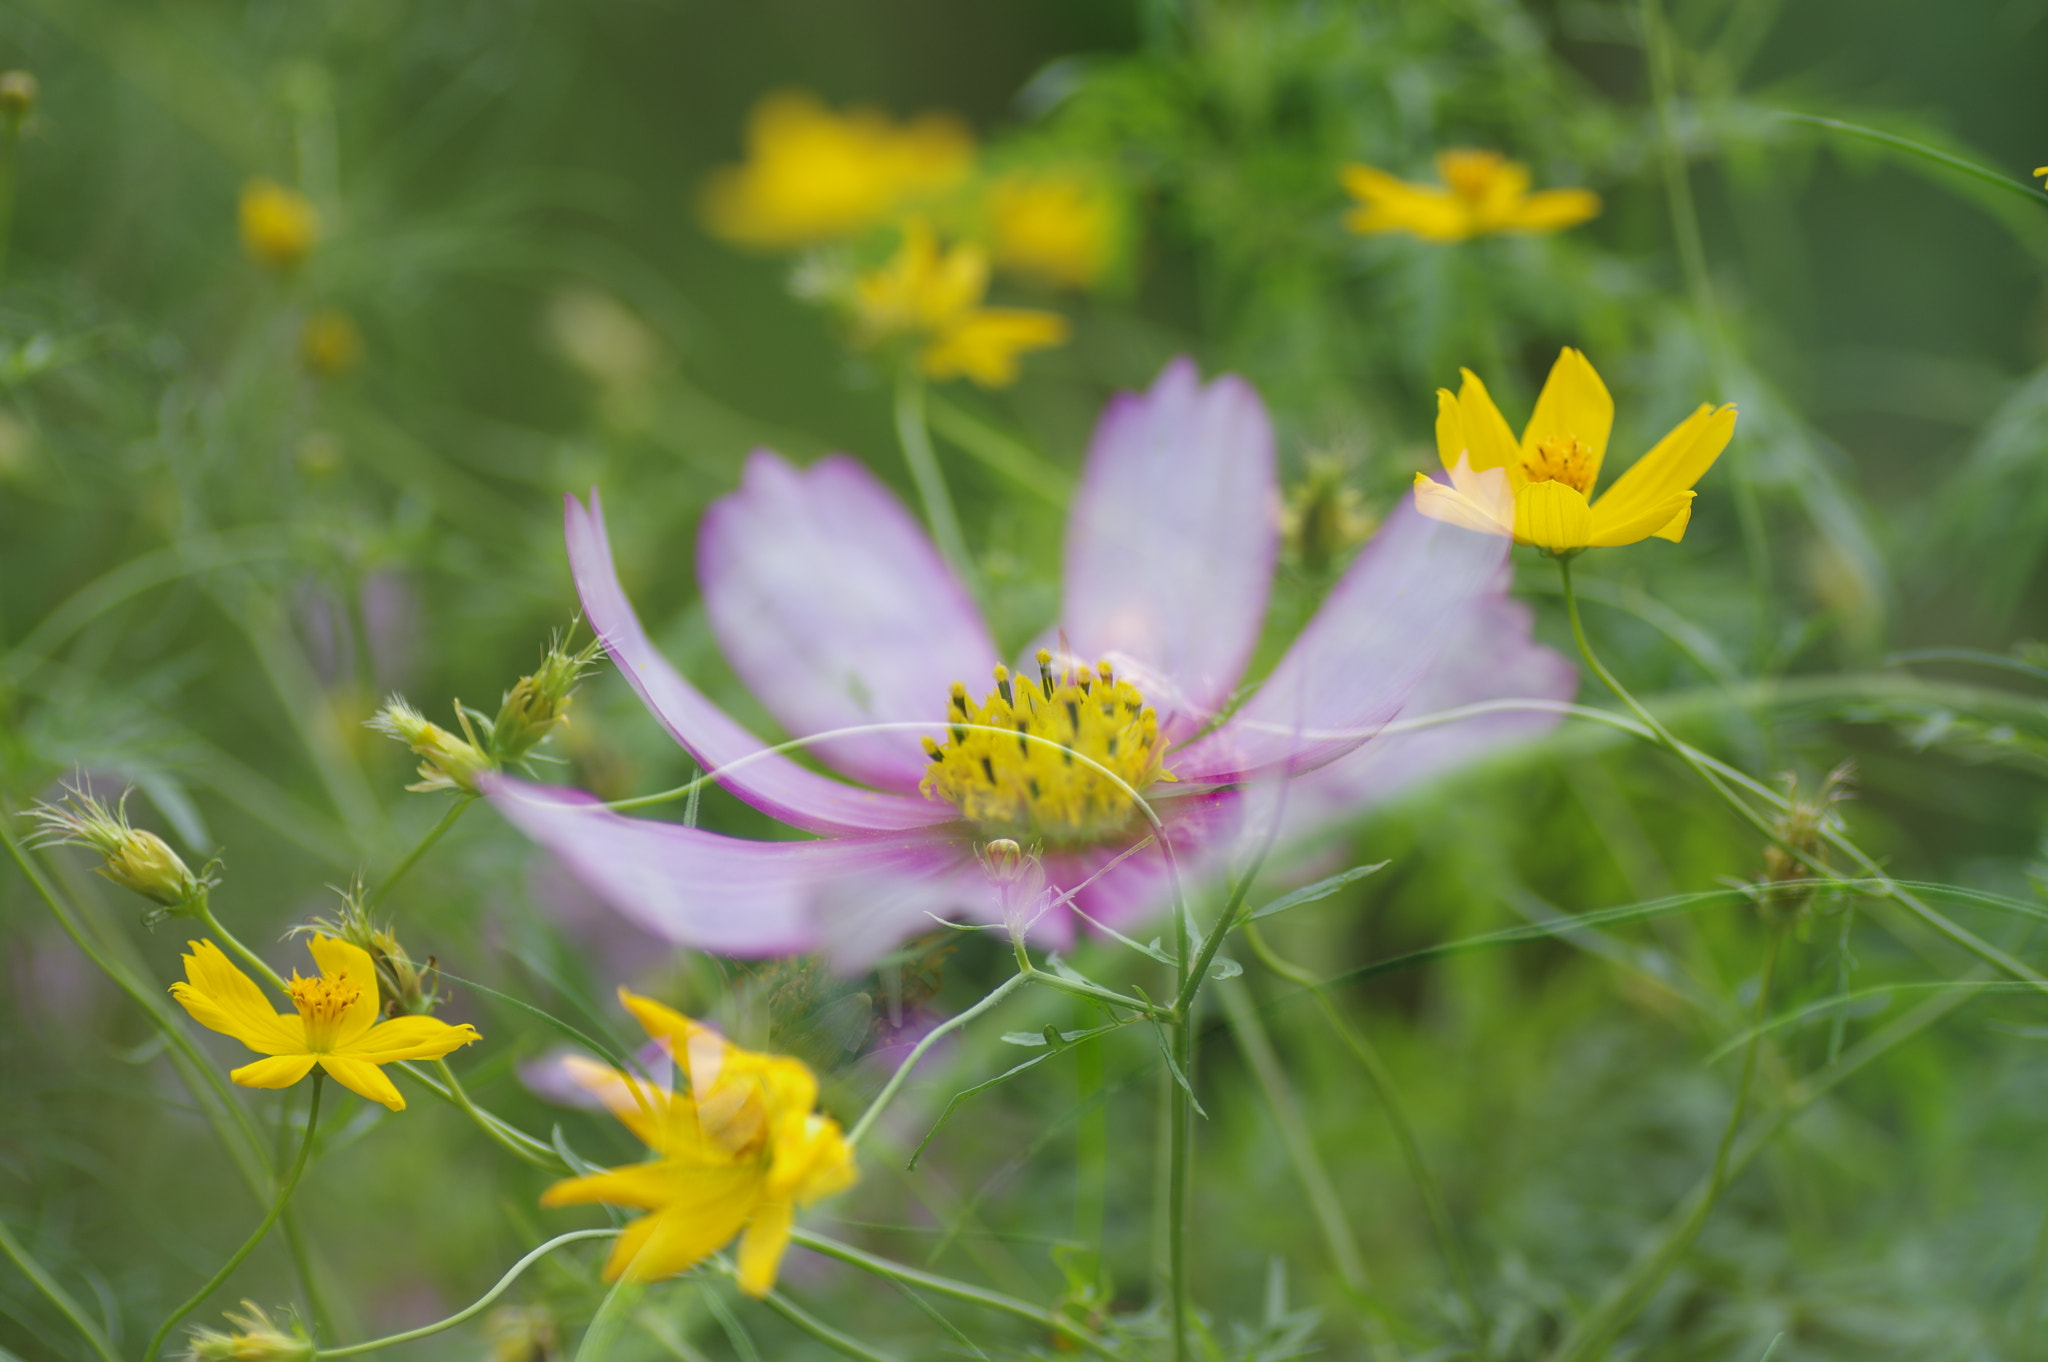 Pentax K-3 II + Tamron SP AF 90mm F2.8 Di Macro sample photo. Cosmos that emerges photography